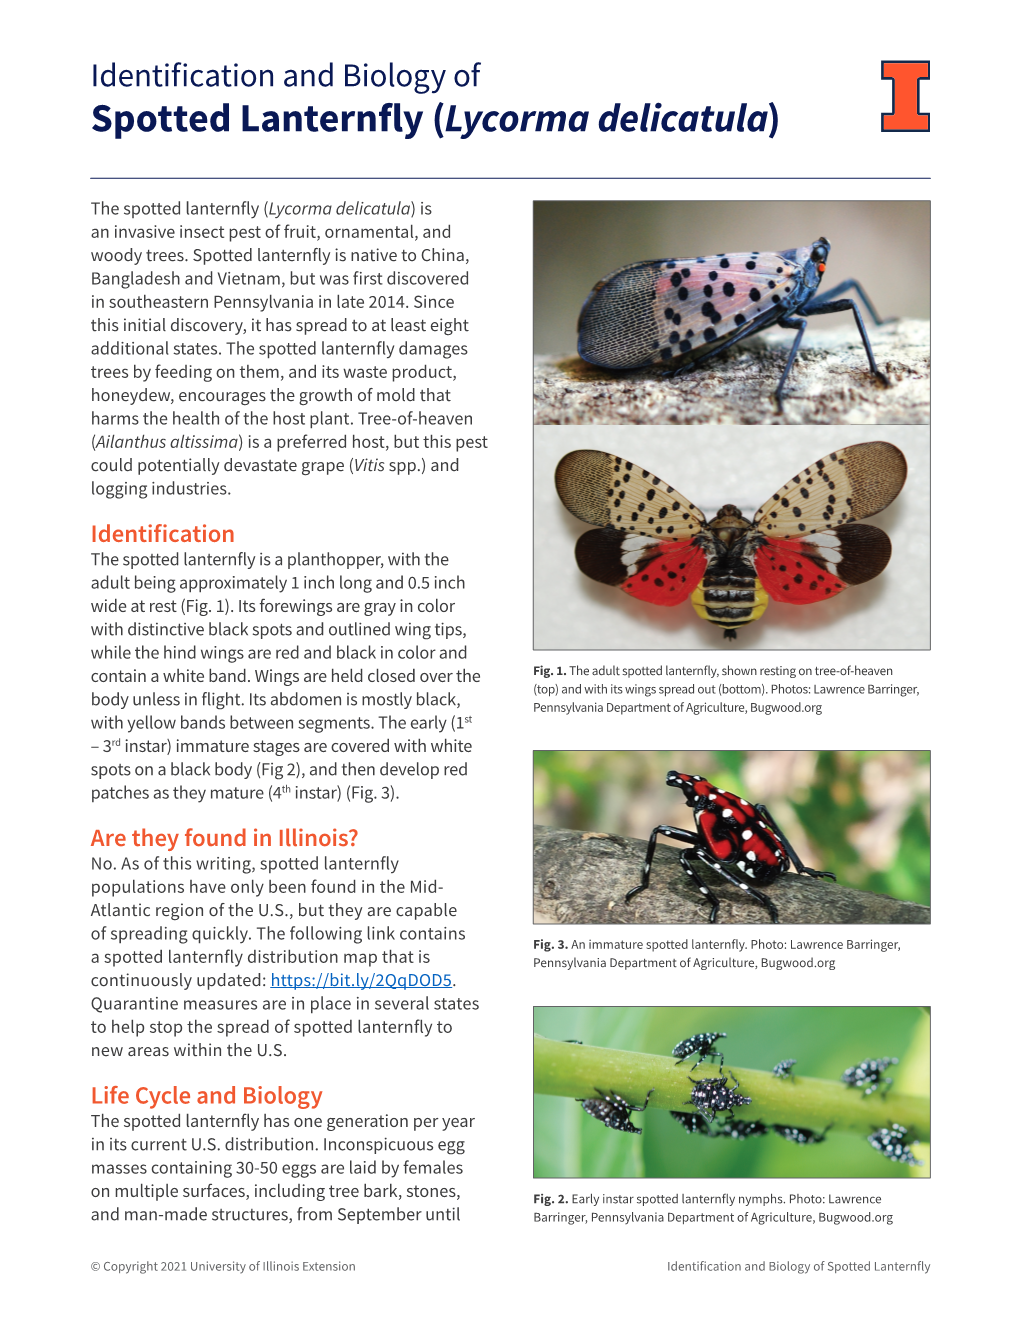 Identification and Biology of Spotted Lanternfly Lycorma( Delicatula)